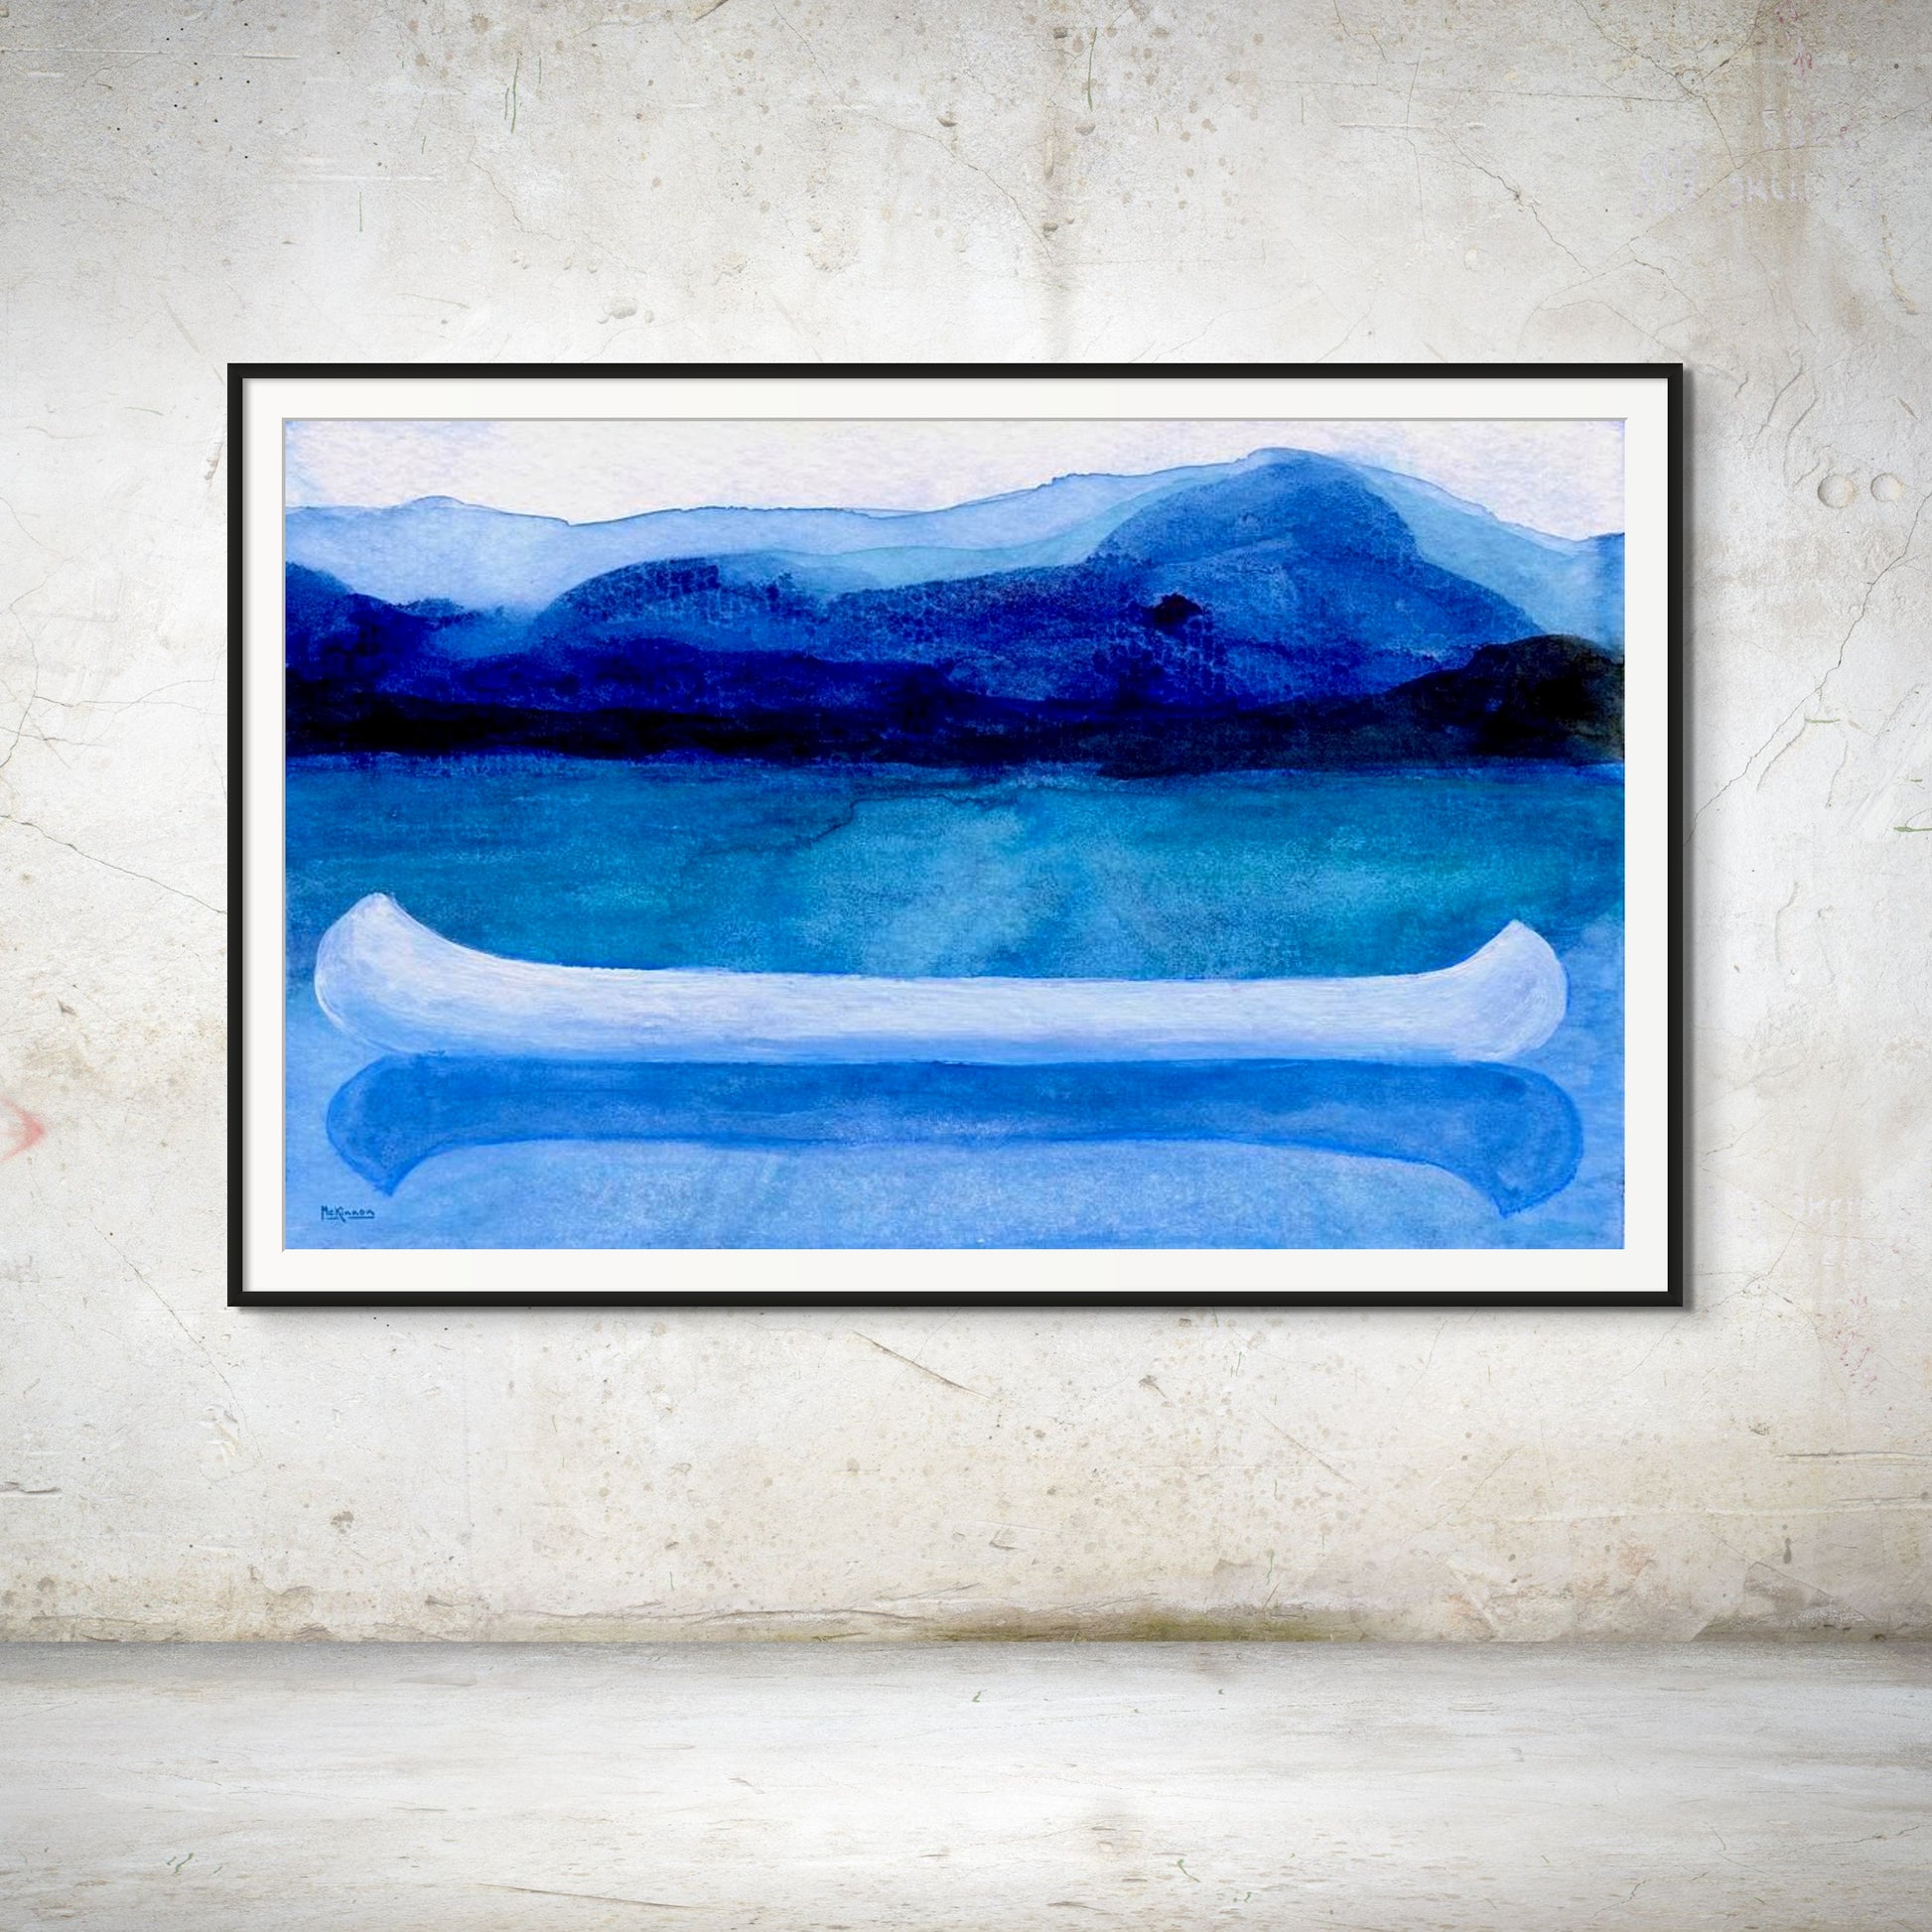 A work of canoeing art by Canadian artist Catherine McKinnon. The watercolor depicts a small white boat, a "canoe", on blue water with a dark blue distant shore and lighter blue distant moutains. The giclee print is framed in black with white matting and is mounted on a light gray textured wall.